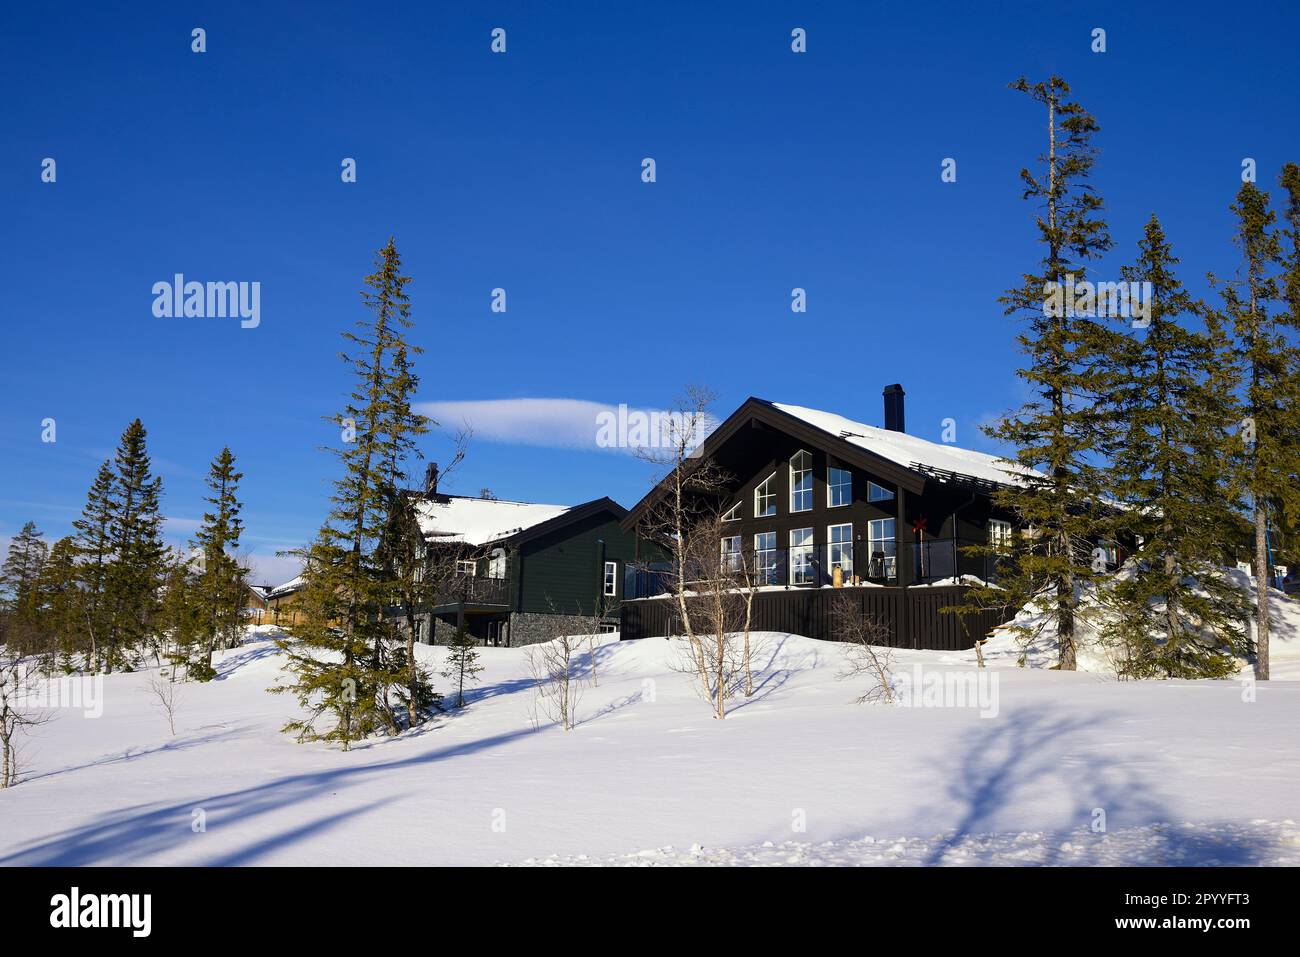 Wooden chalets among snow covered trees, Storhogna, Sweden Stock Photo